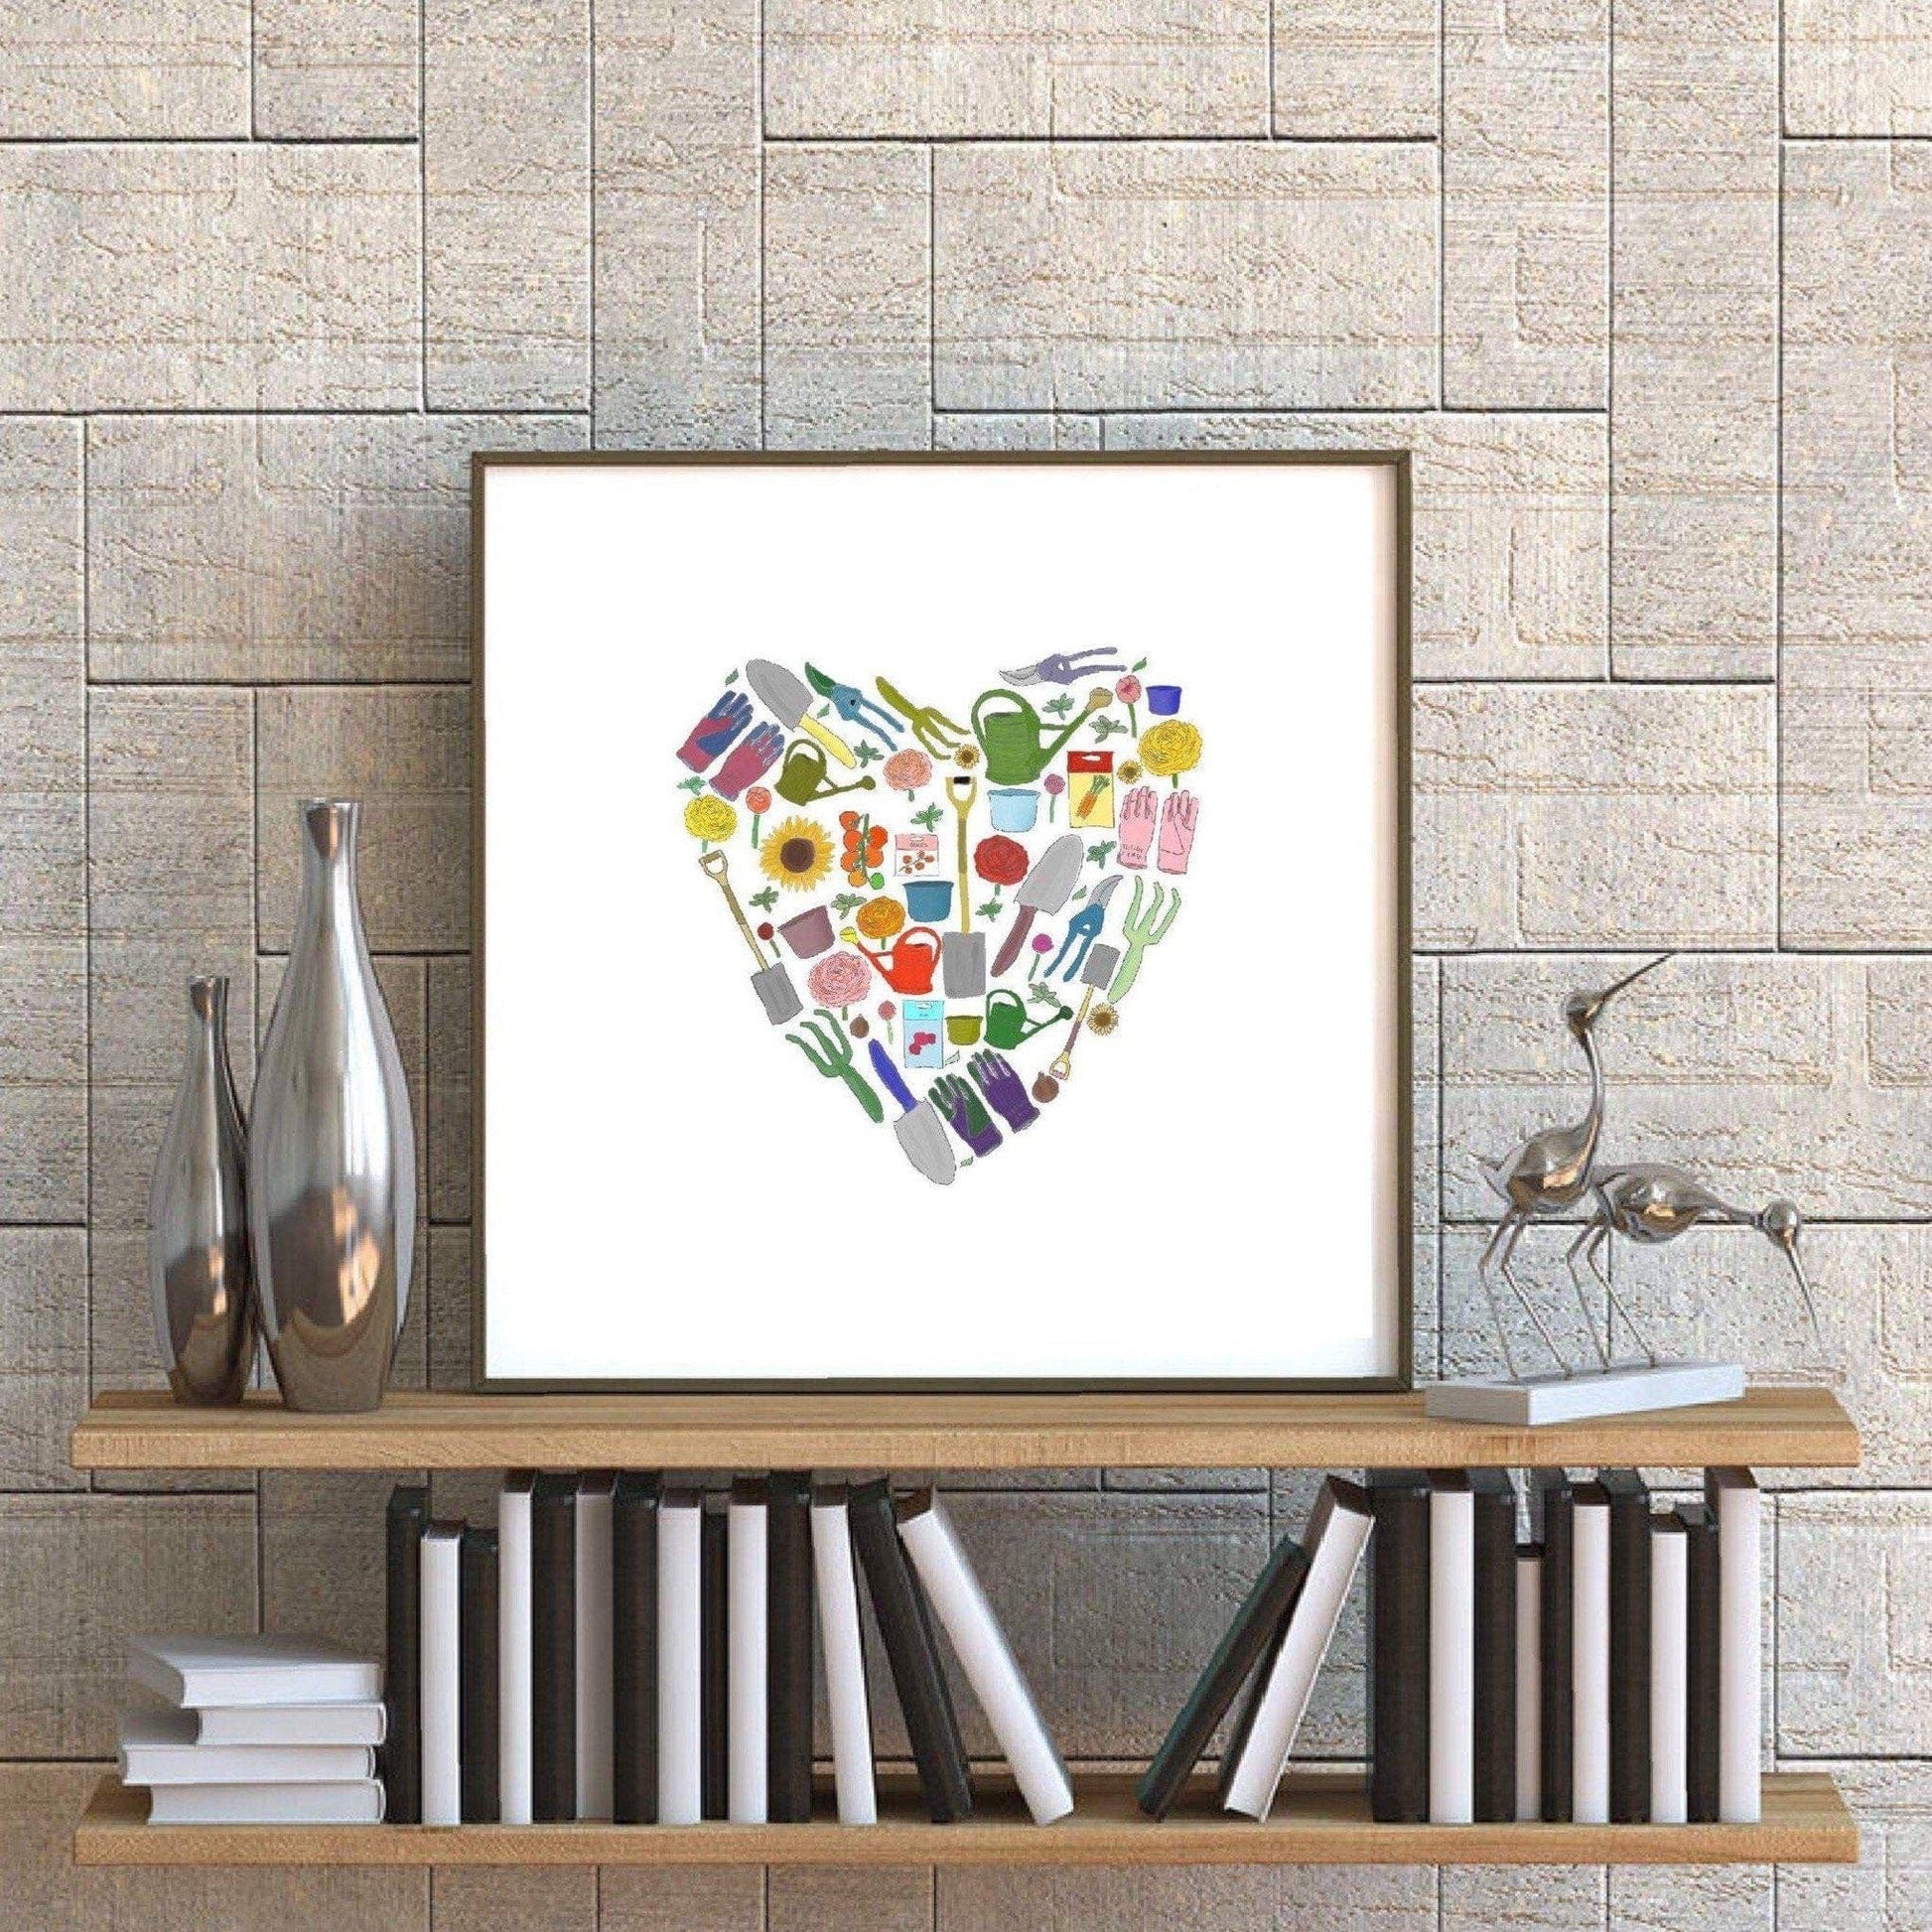 Lovely giclee print of gardening items illustrated to form a heart shape.